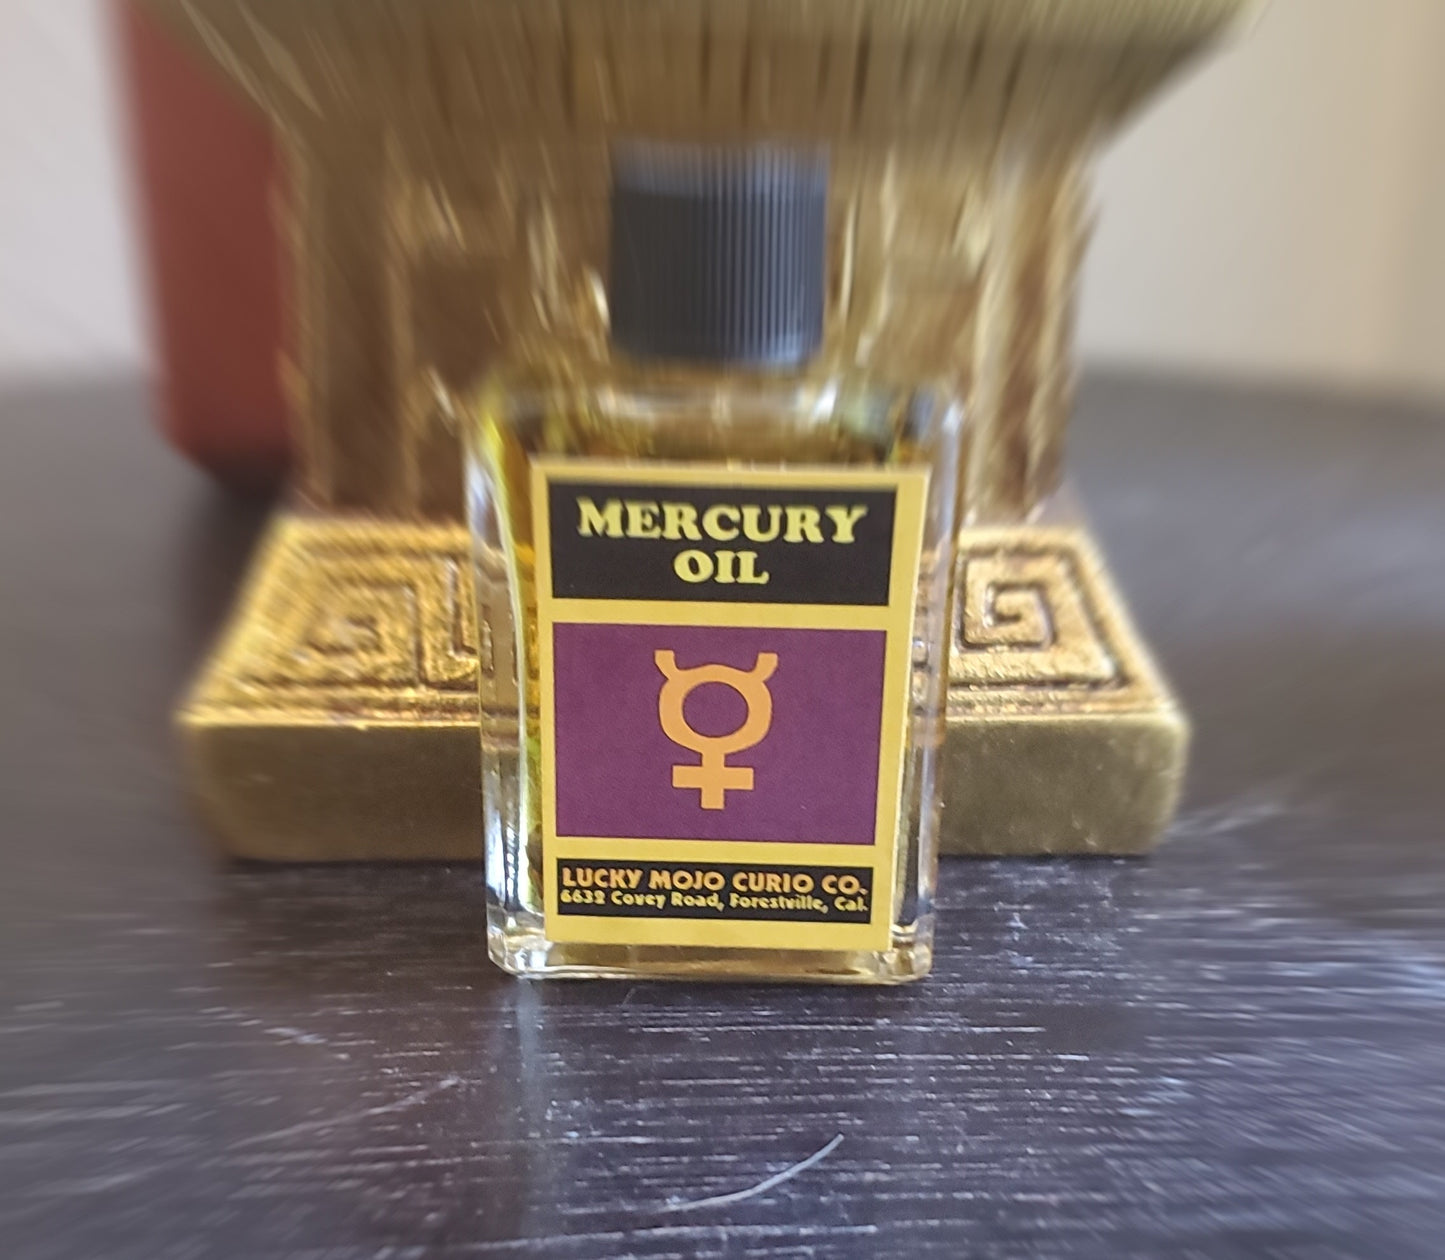 LuckyMojoCurioCo "Mercury Oil" Anointing / Conjure Oil #GreatDeal #LuckyMojoCurioCo #LuckyMojo #EffectiveOils #MustHave